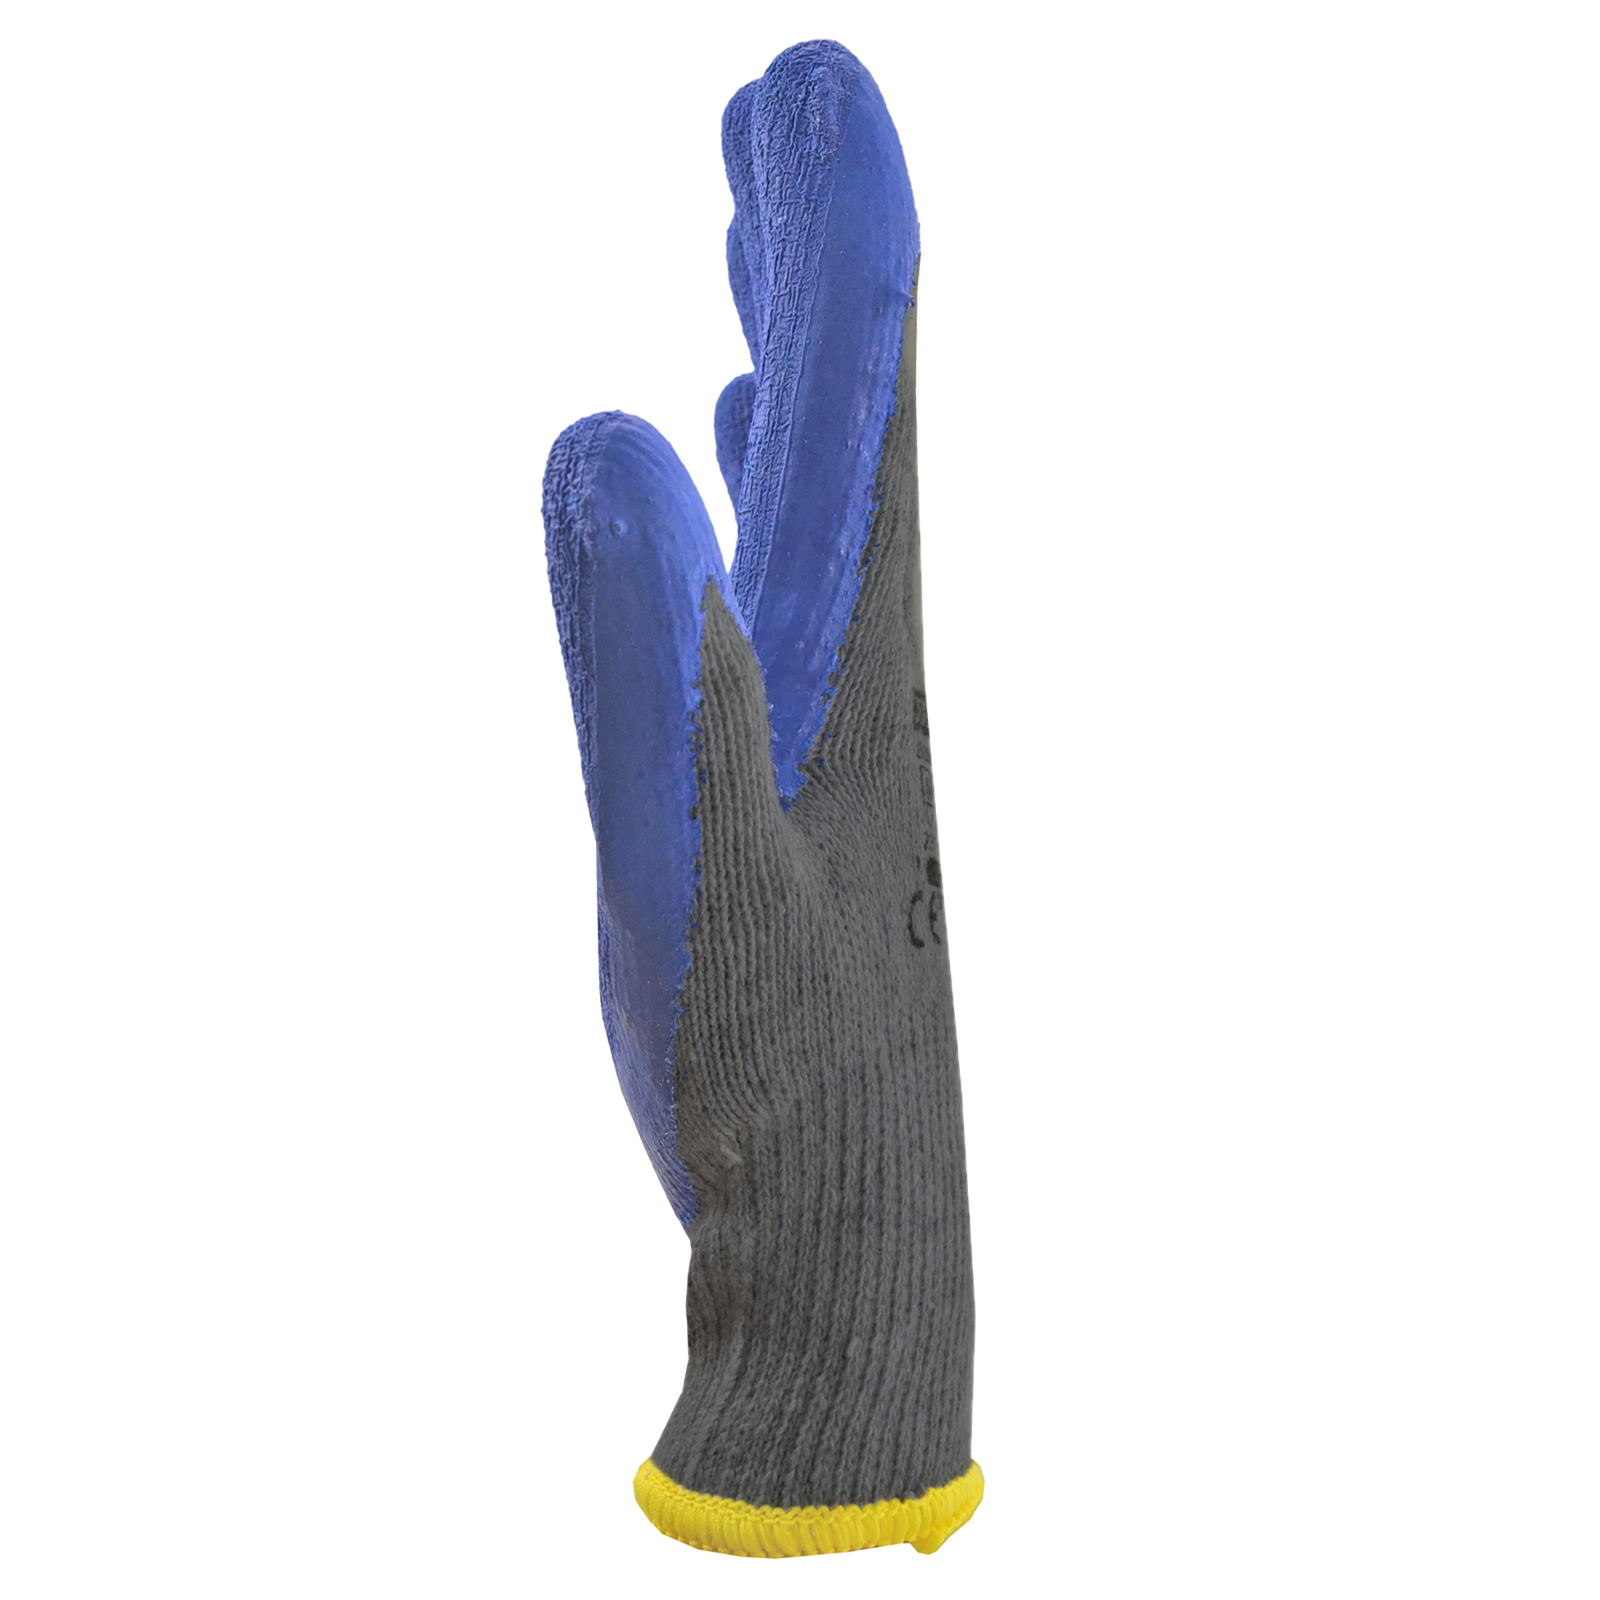 https://technopackcorp.com/cdn/shop/files/SAFETY-WORK-GLOVES-WITH-CRINKLE-LATEX-DIPPED-PALMS-PACK-OF-12-S-GD-07-JORESTECH-H_8_ce3a4f00-8394-455e-a629-5e04569e9ffb_1600x1600.png?v=1689087308